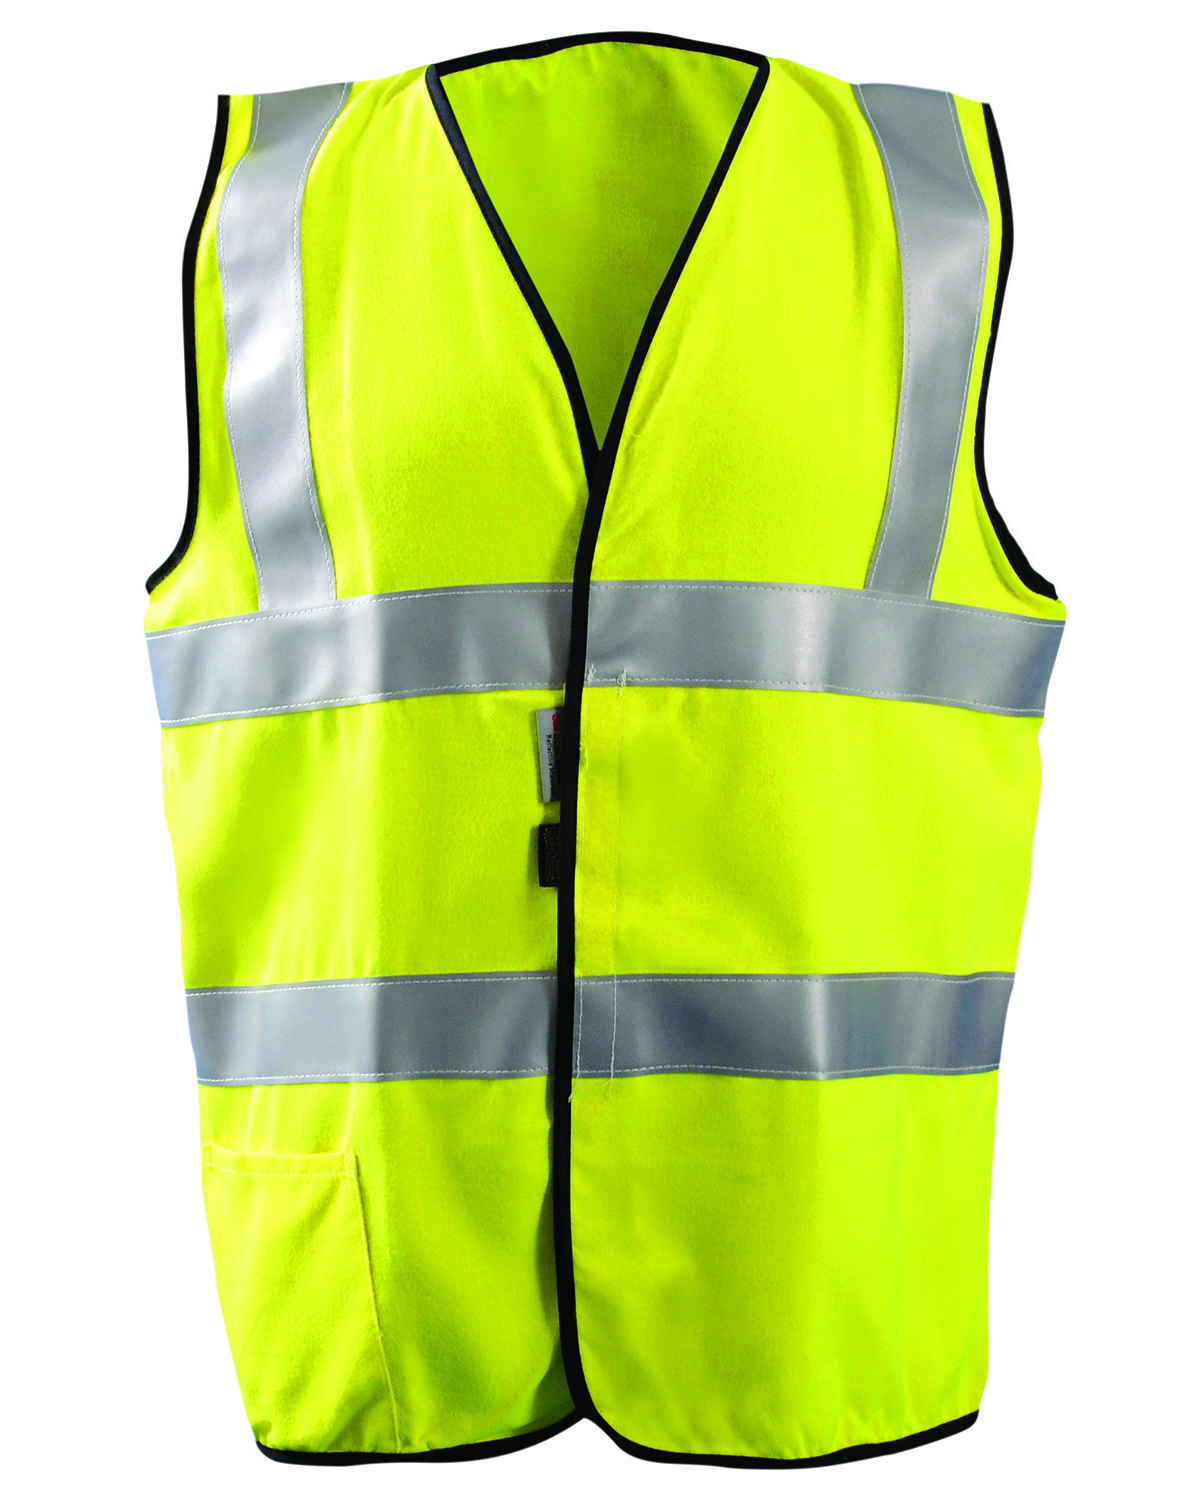 OccuNomix LUXSSFG - Men's High Visibility Classic Solid Standard Safety Vest